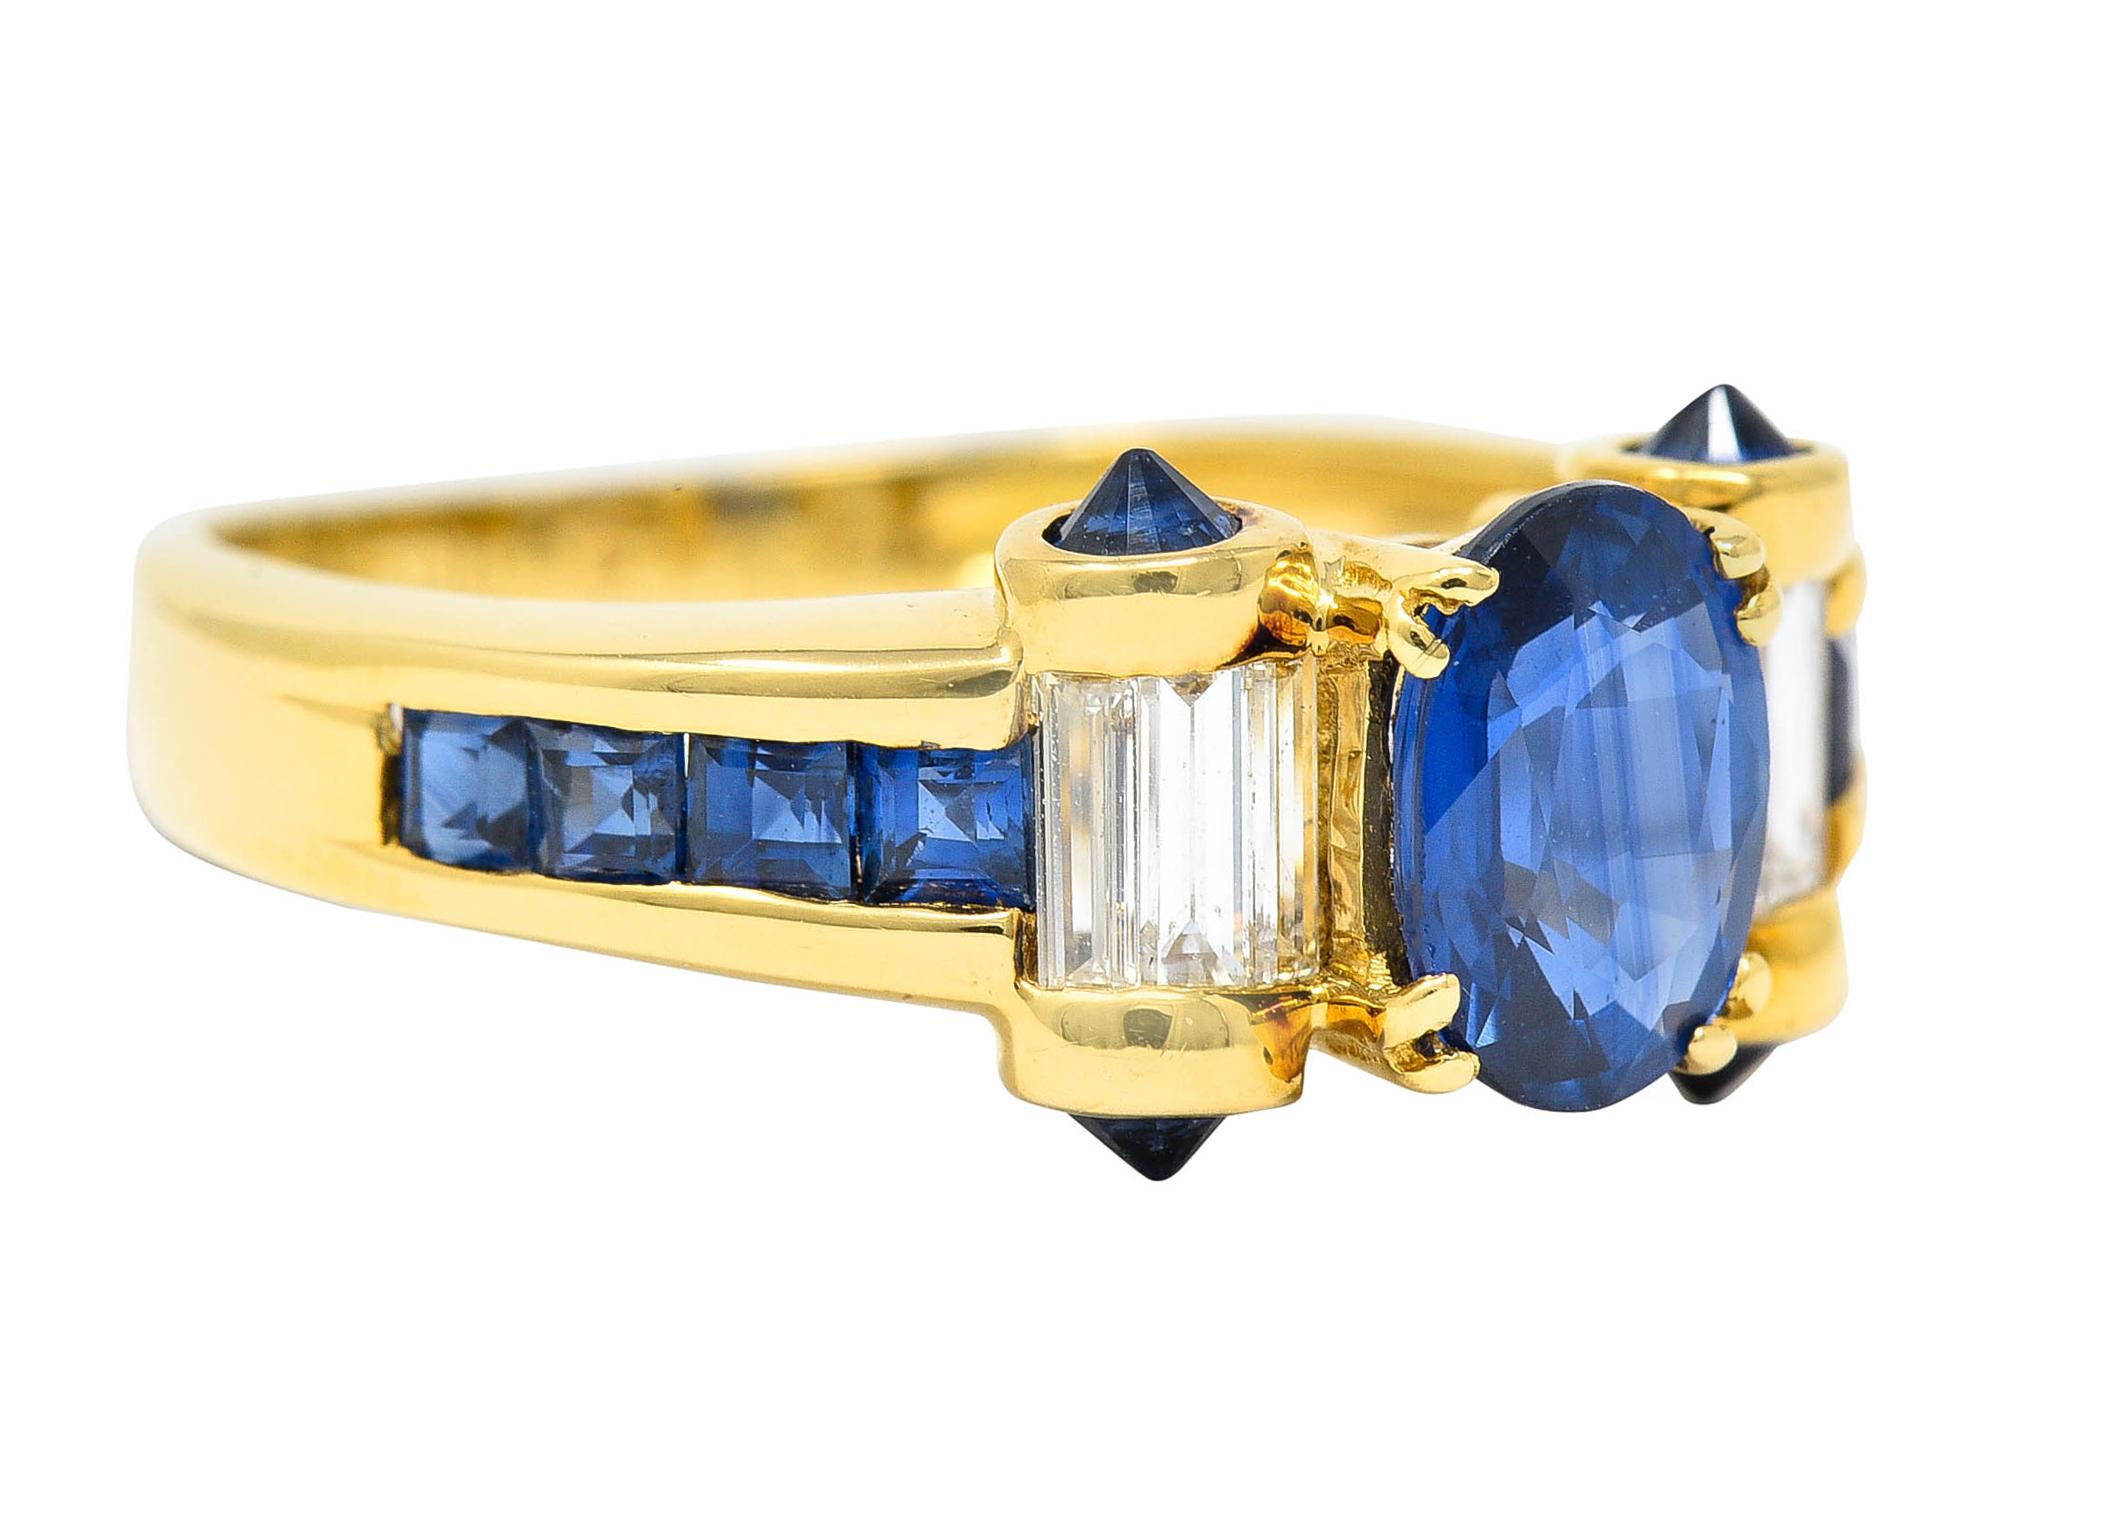 Centering an oval cut sapphire, basket set and weighing approximately 1.10 carats

Transparent and strongly royal blue in color

Flanked by scrolled rotunda shoulders, channel set with baguette cut diamonds, weighing in total 0.56 carat

Accented by